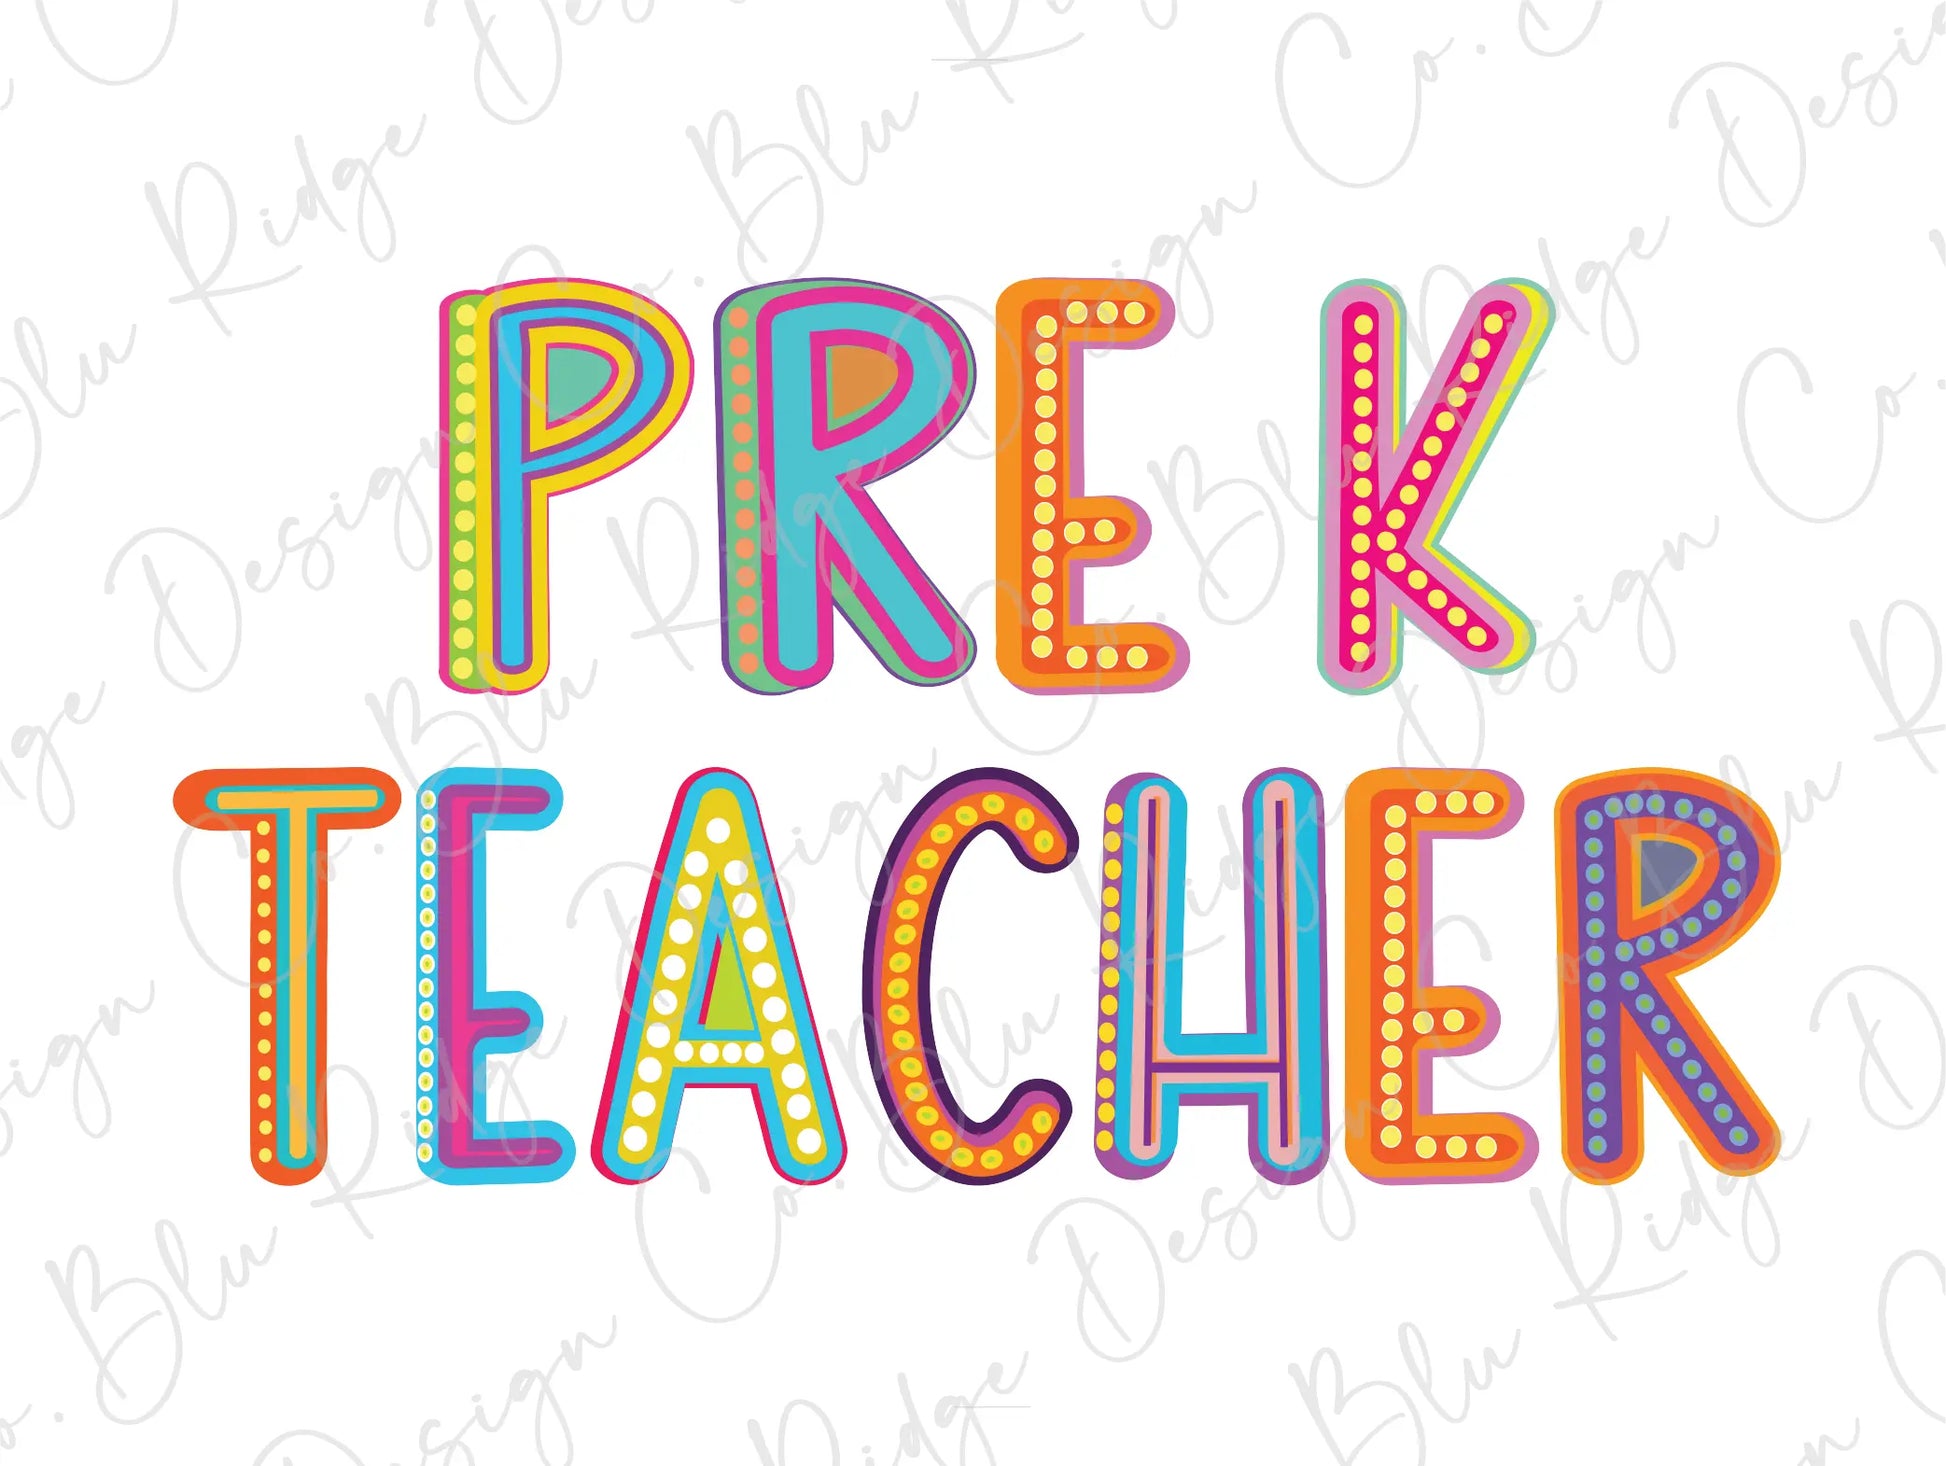 the words prek teacher are made up of neon colored letters